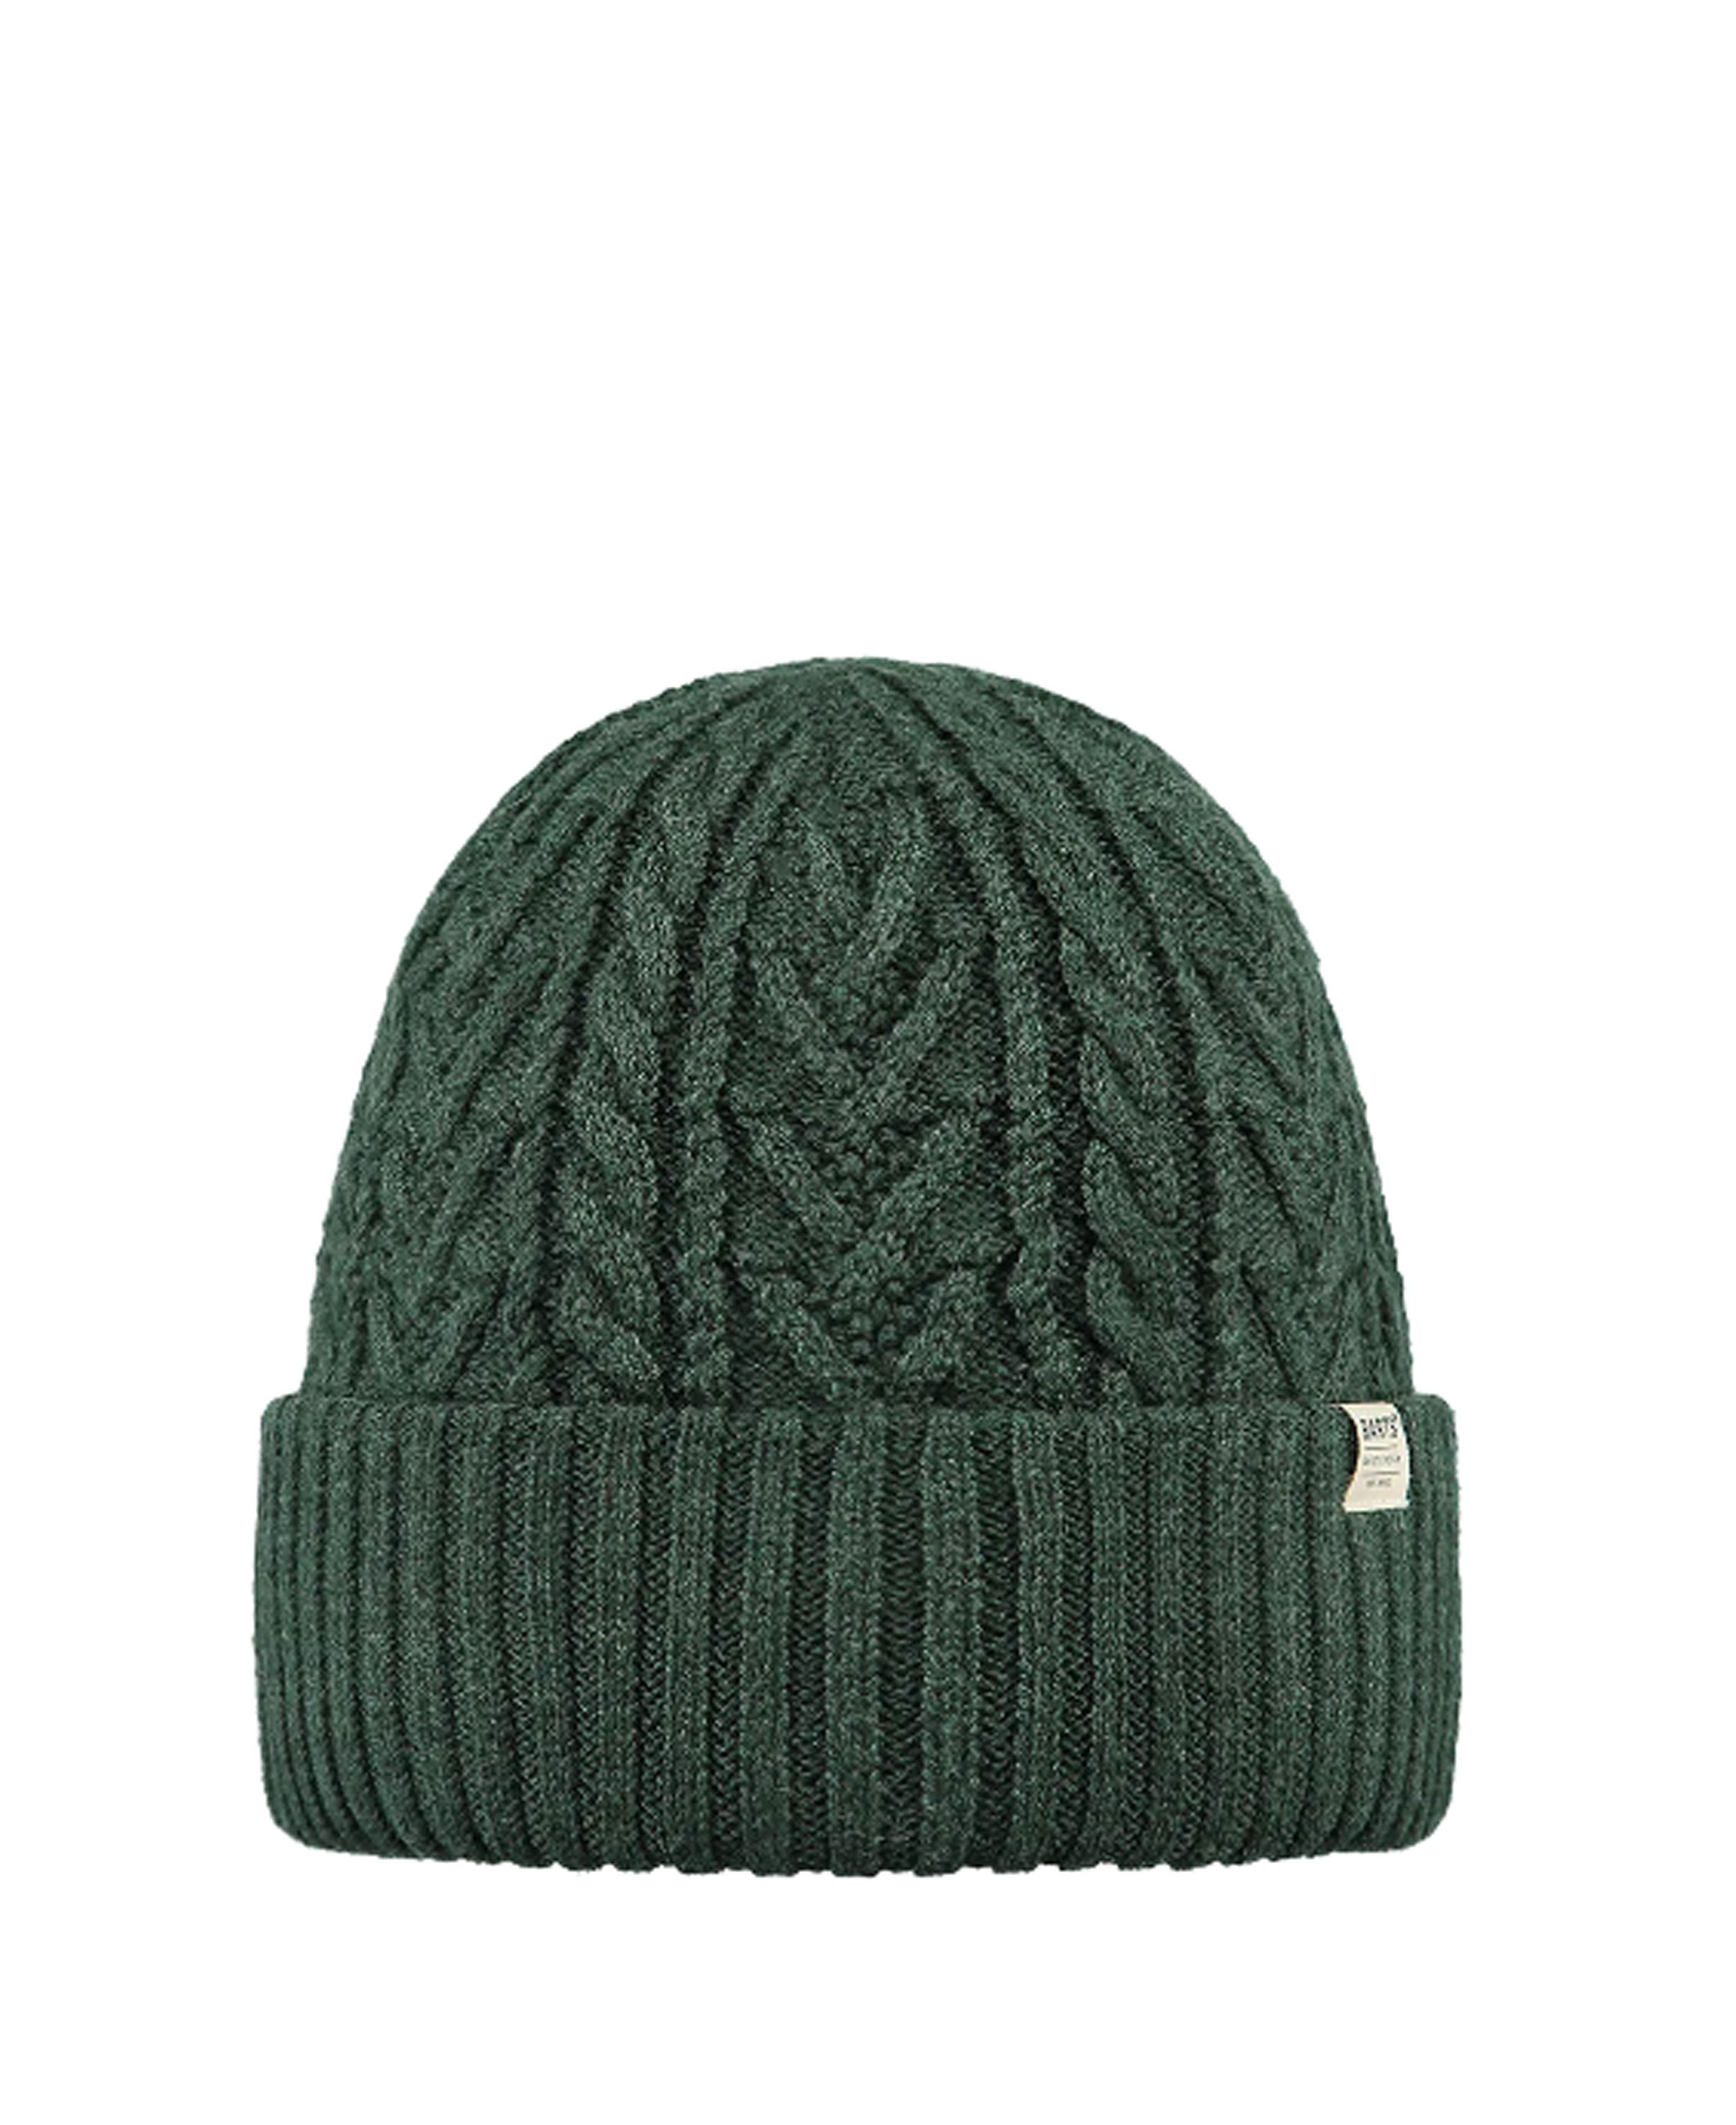 Pacifick Beanie - Army